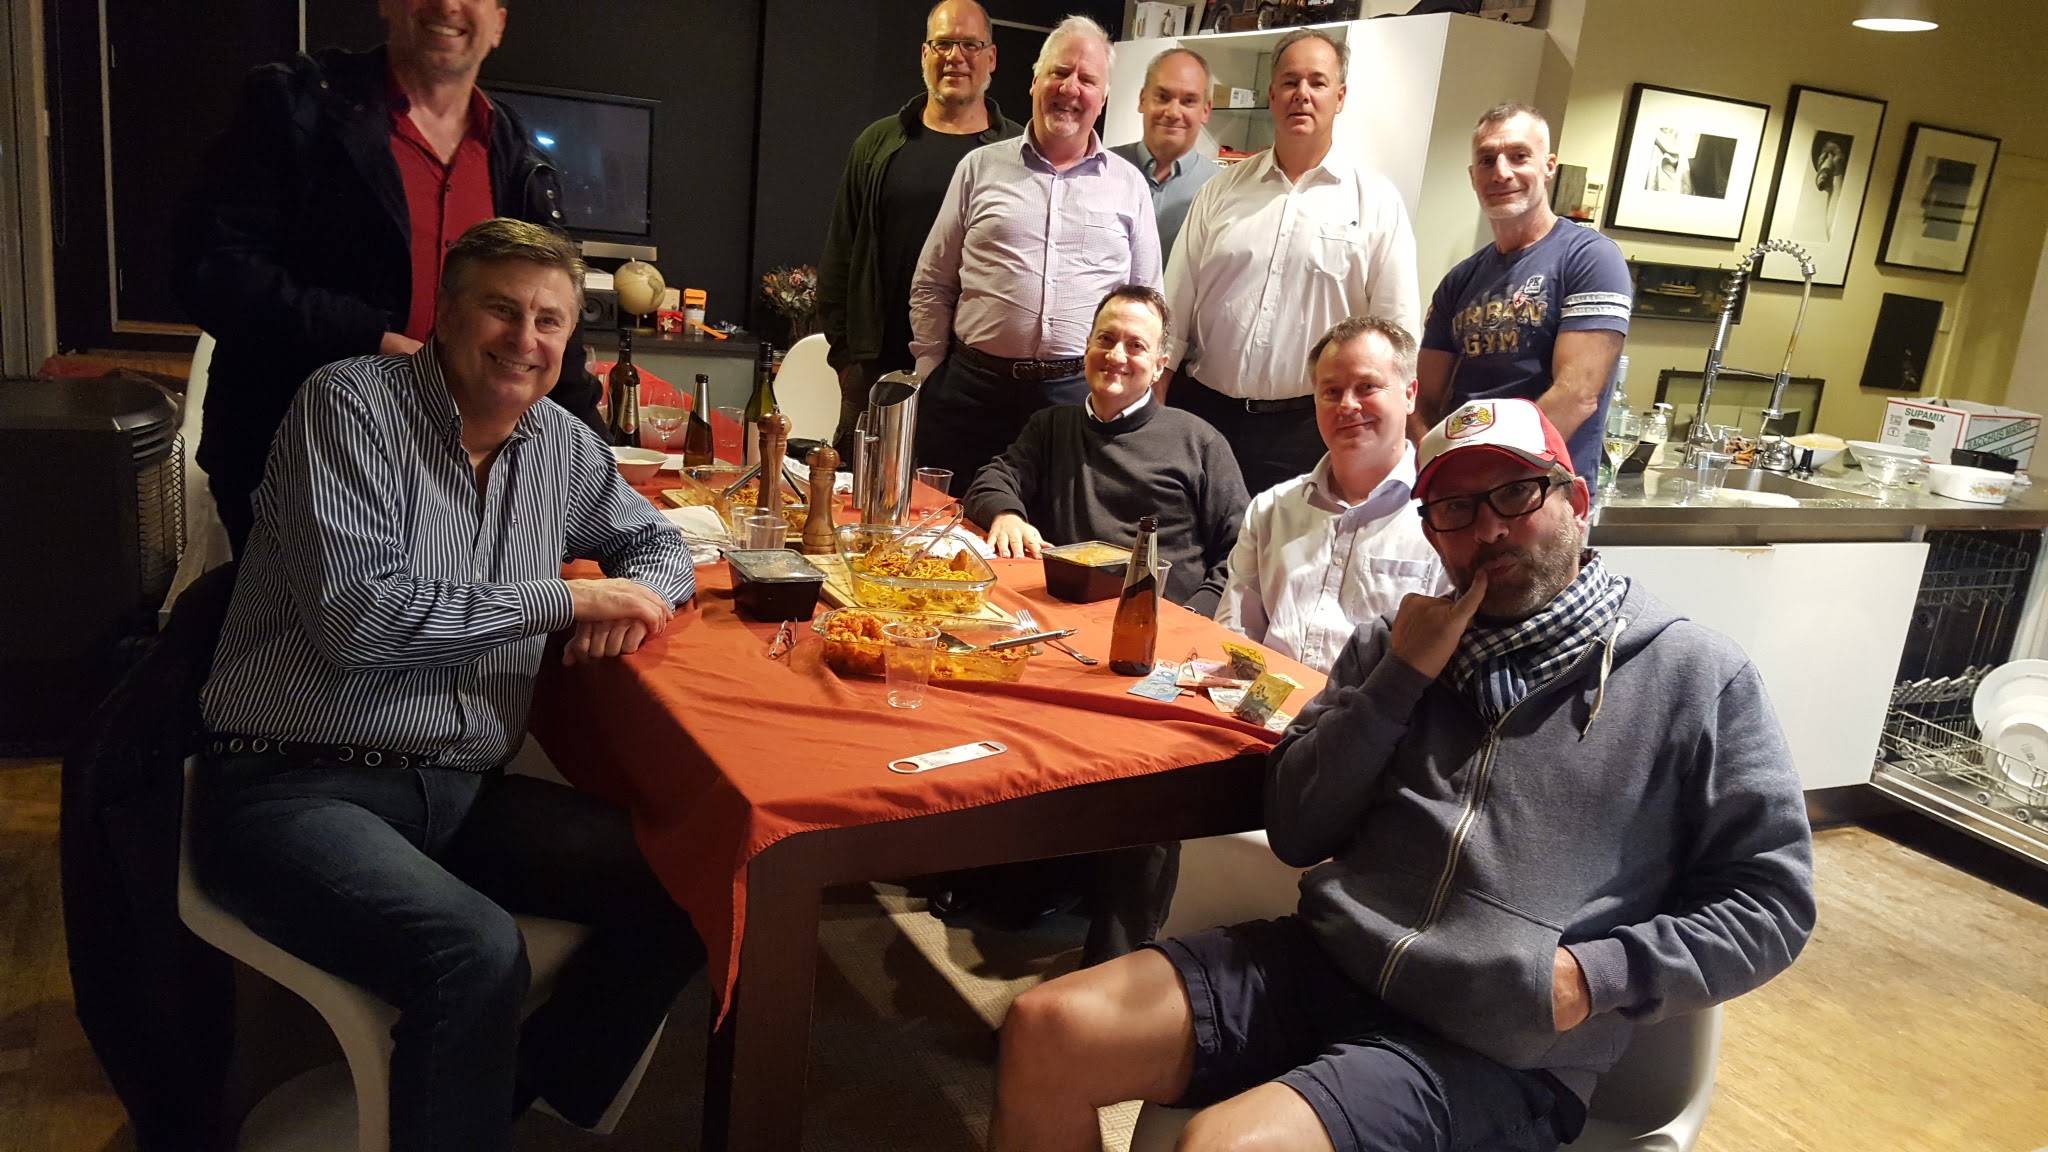 Join new Men’s Table for mateship and support